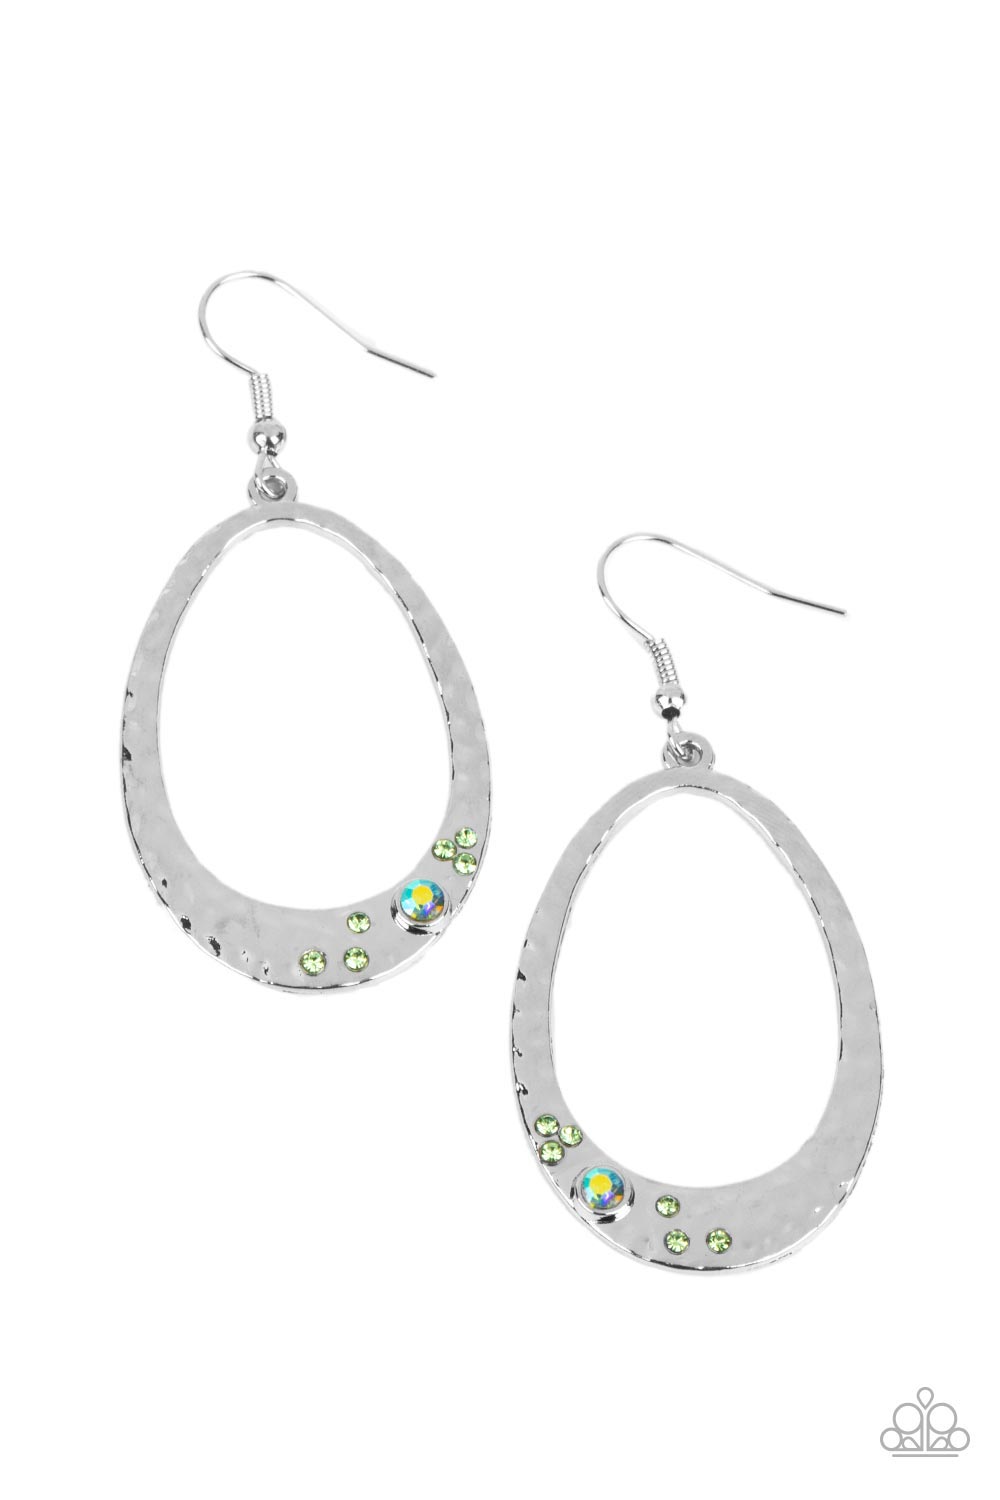 Seafoam Shimmer - Green Iridescent and Silver Earrings - Paparazzi Accessories - Green and iridescent rhinestones is haphazardly sprinkled across the bottom of a hammered silver teardrop, resulting in an effervescent sparkle. Earring attaches to a standard fishhook fitting.